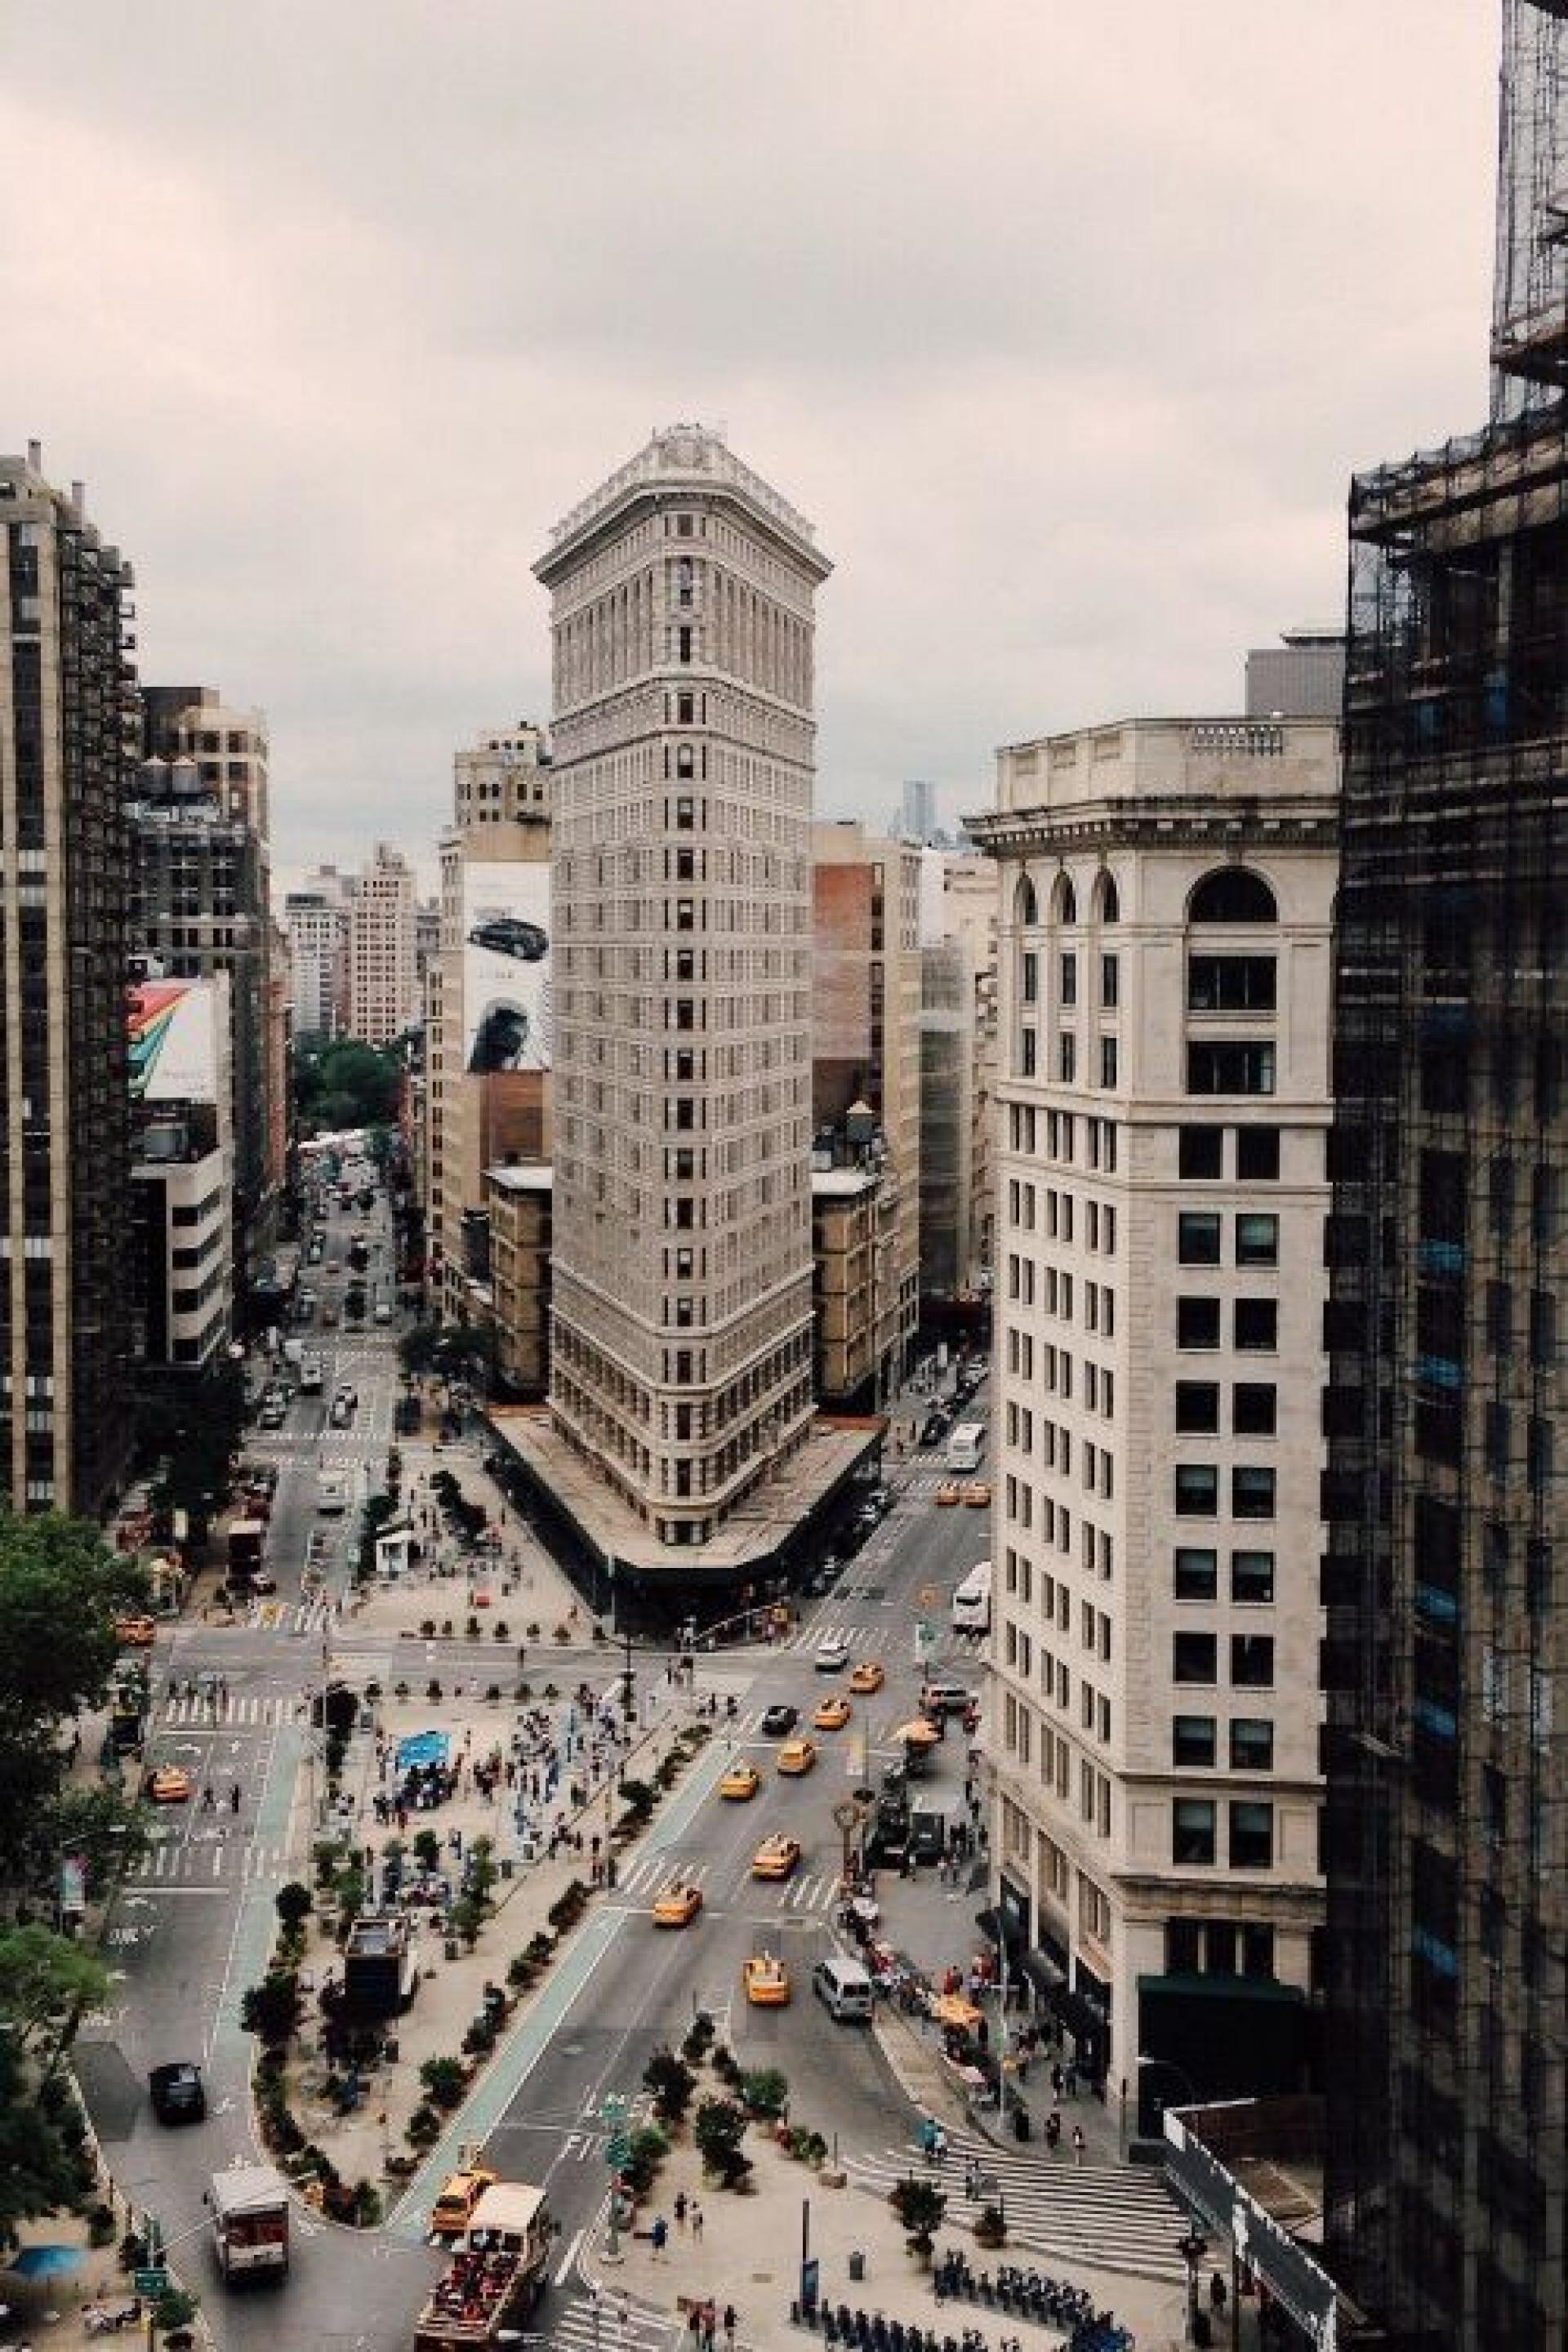 The Flatiron Building is known for its triangular structural composition which also gave the building its name. | Photo via Tumblr Vitna